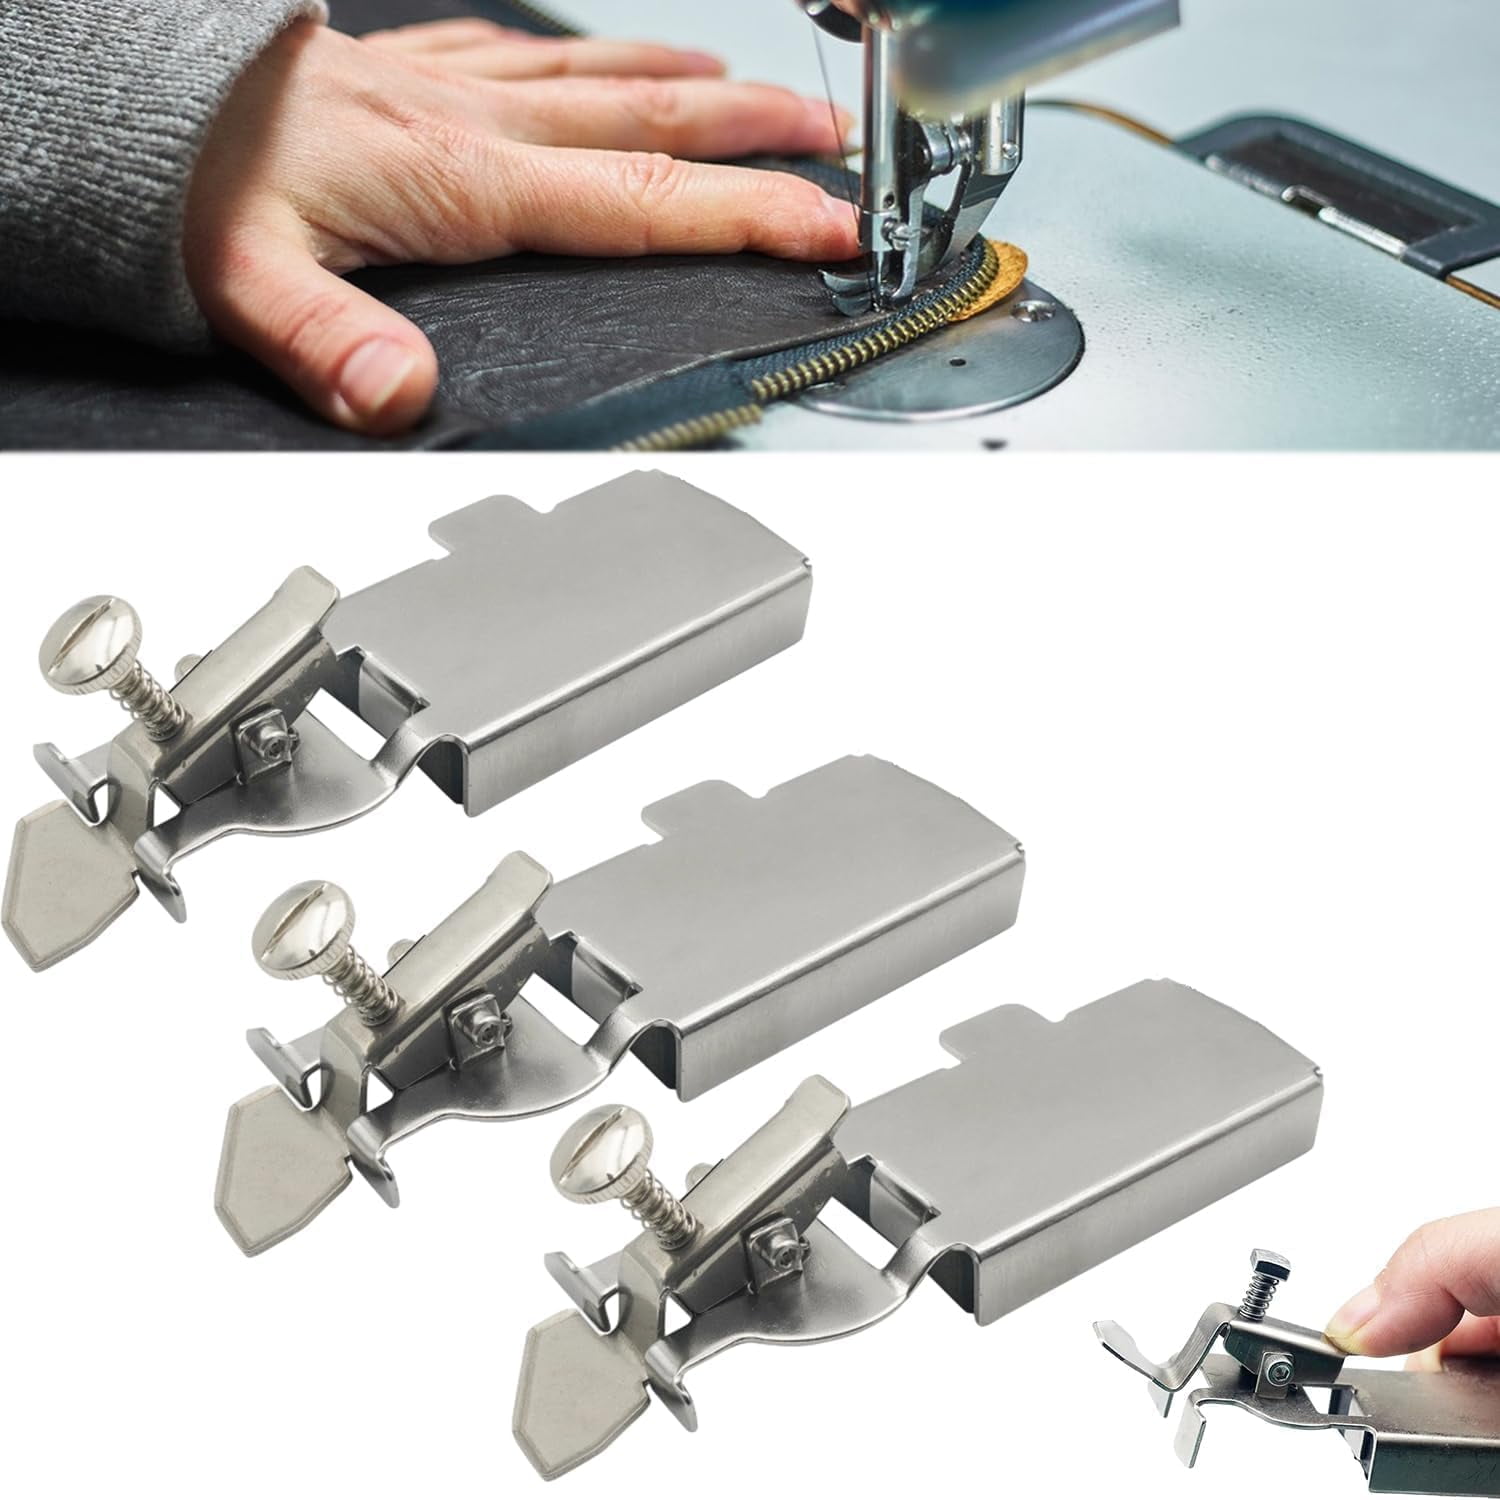 Magnetic Seam Guide for Sewing Machine, Magnetic Sewing Guide with Clip,  Hemmer Seam Guide for Walking Foot Sewing Machine - AliExpress